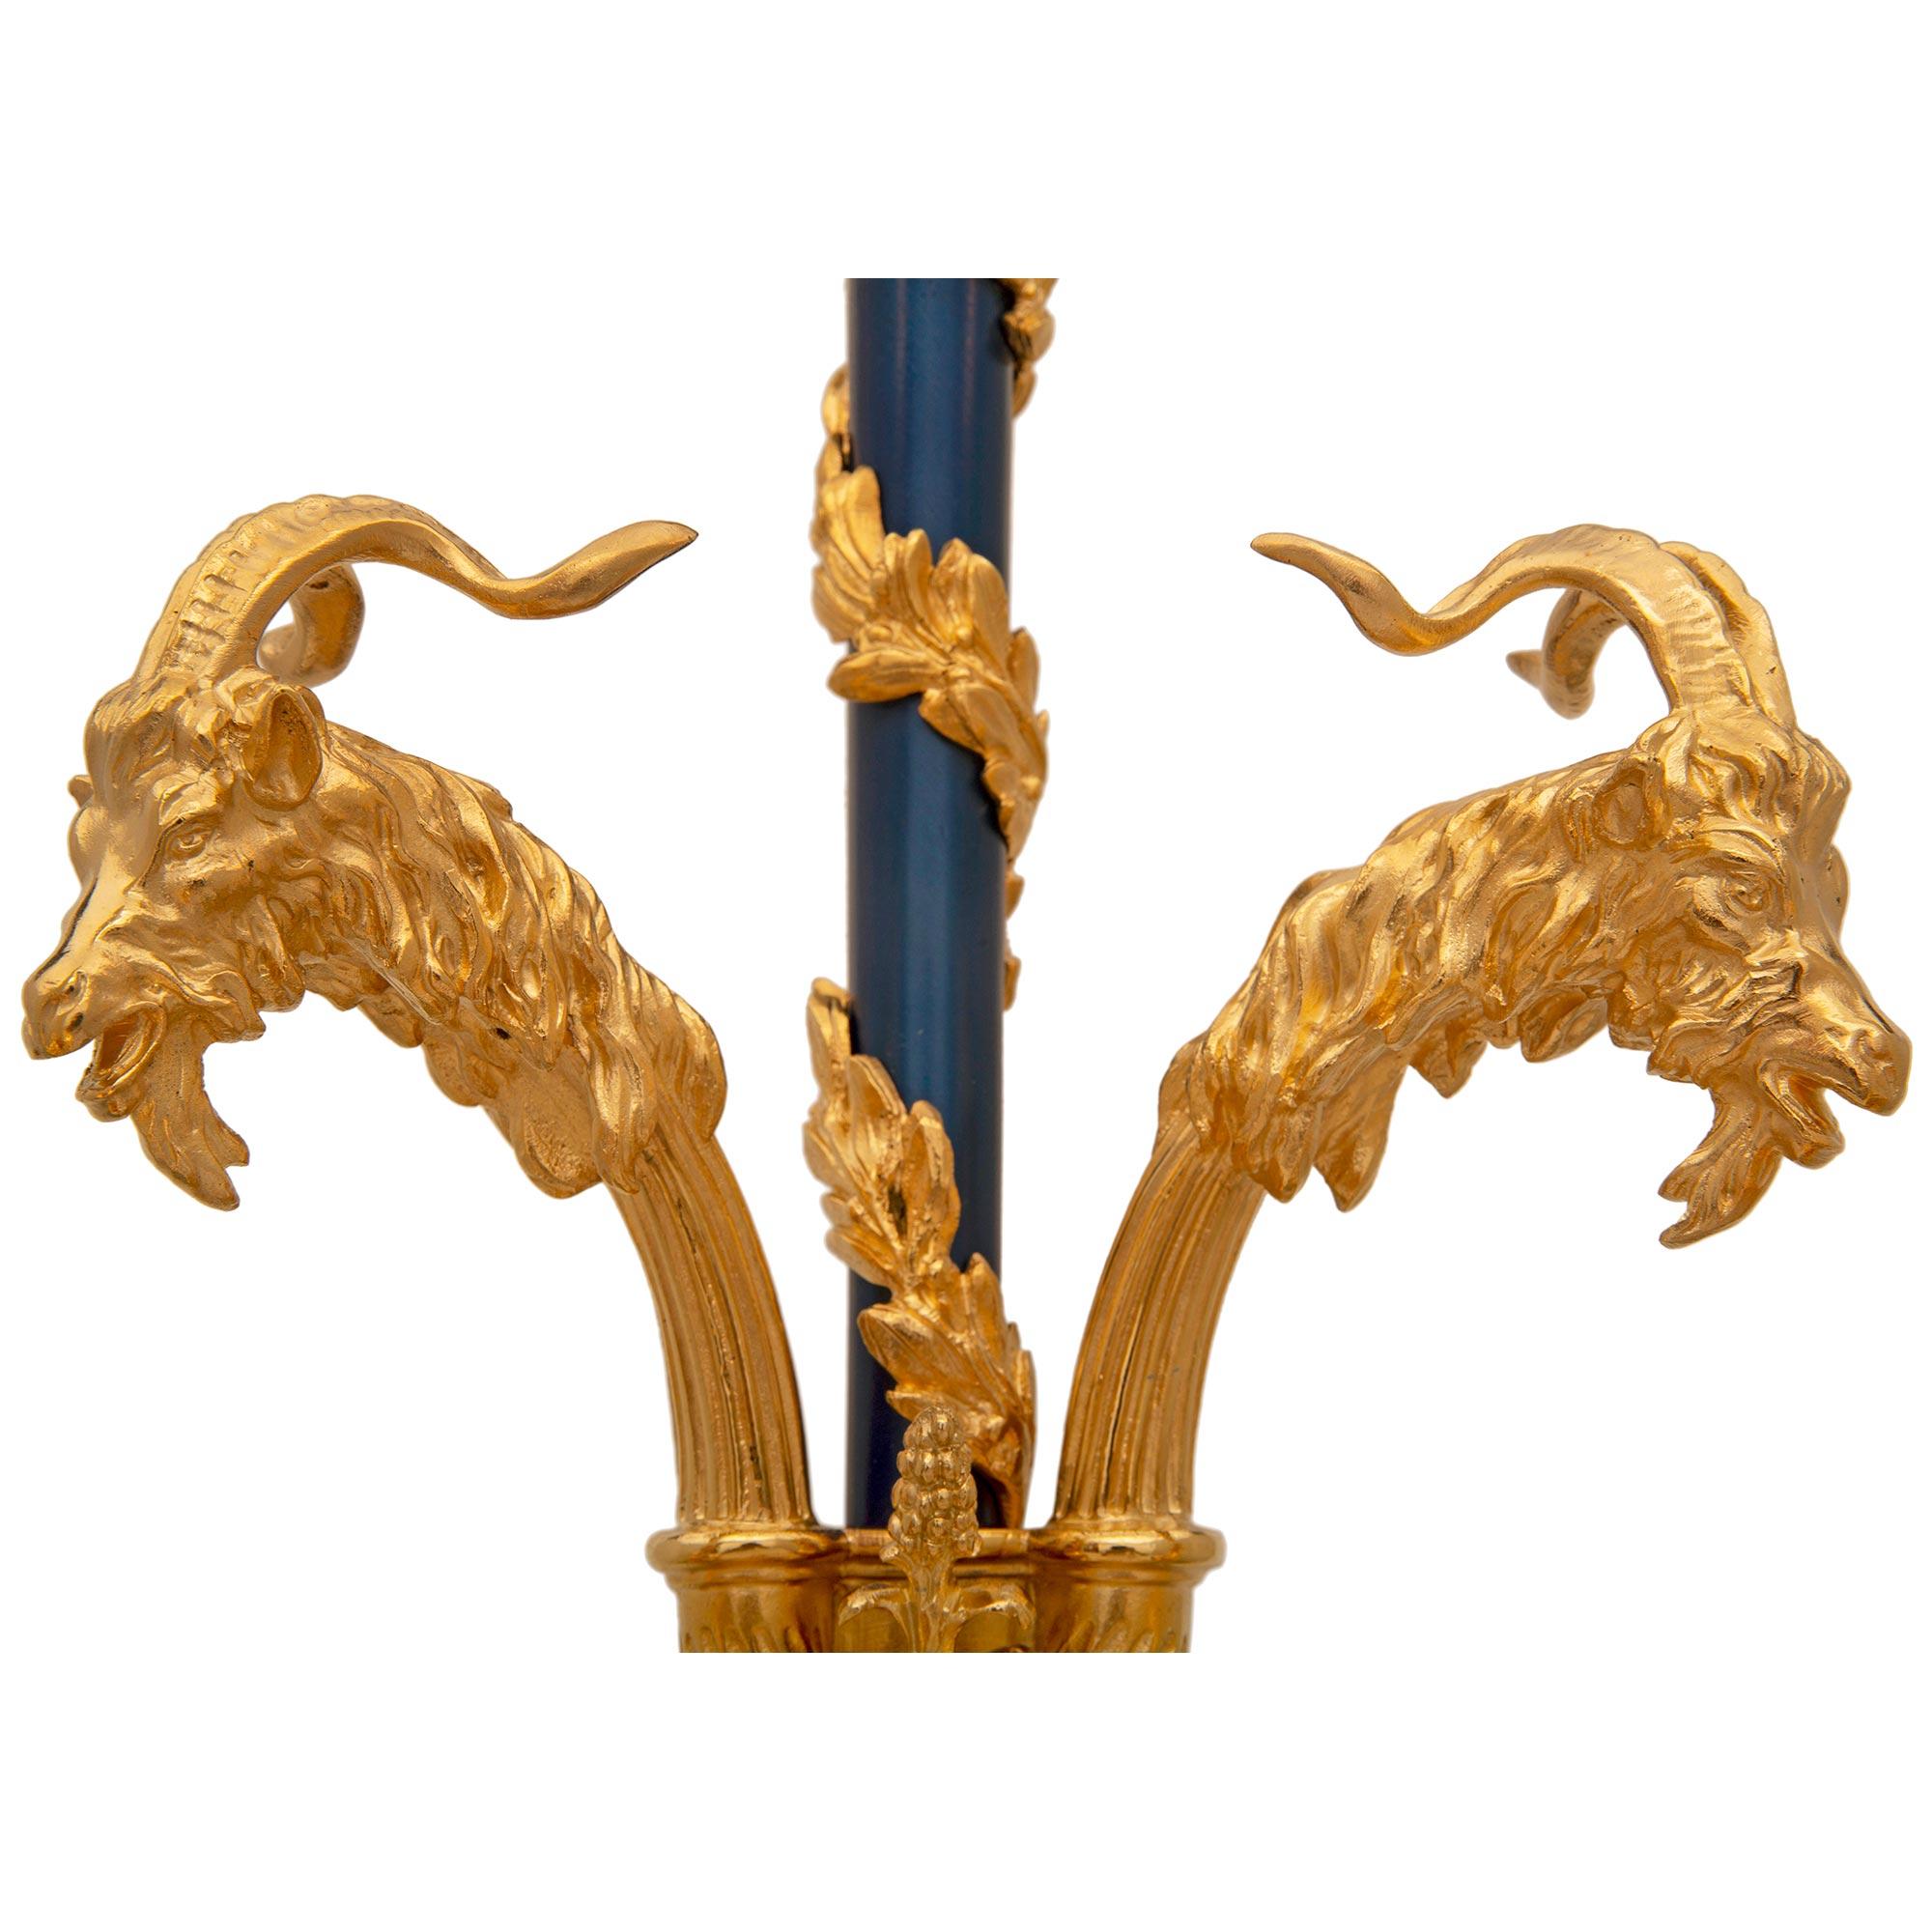 A striking and very unique pair of French 19th century Louis XVI st. enameled bronze and ormolu sconces after a model by Pierre Gouthière. Each two arm sconce is centered by a beautiful bottom acorn finial with acanthus leaves below the extremely